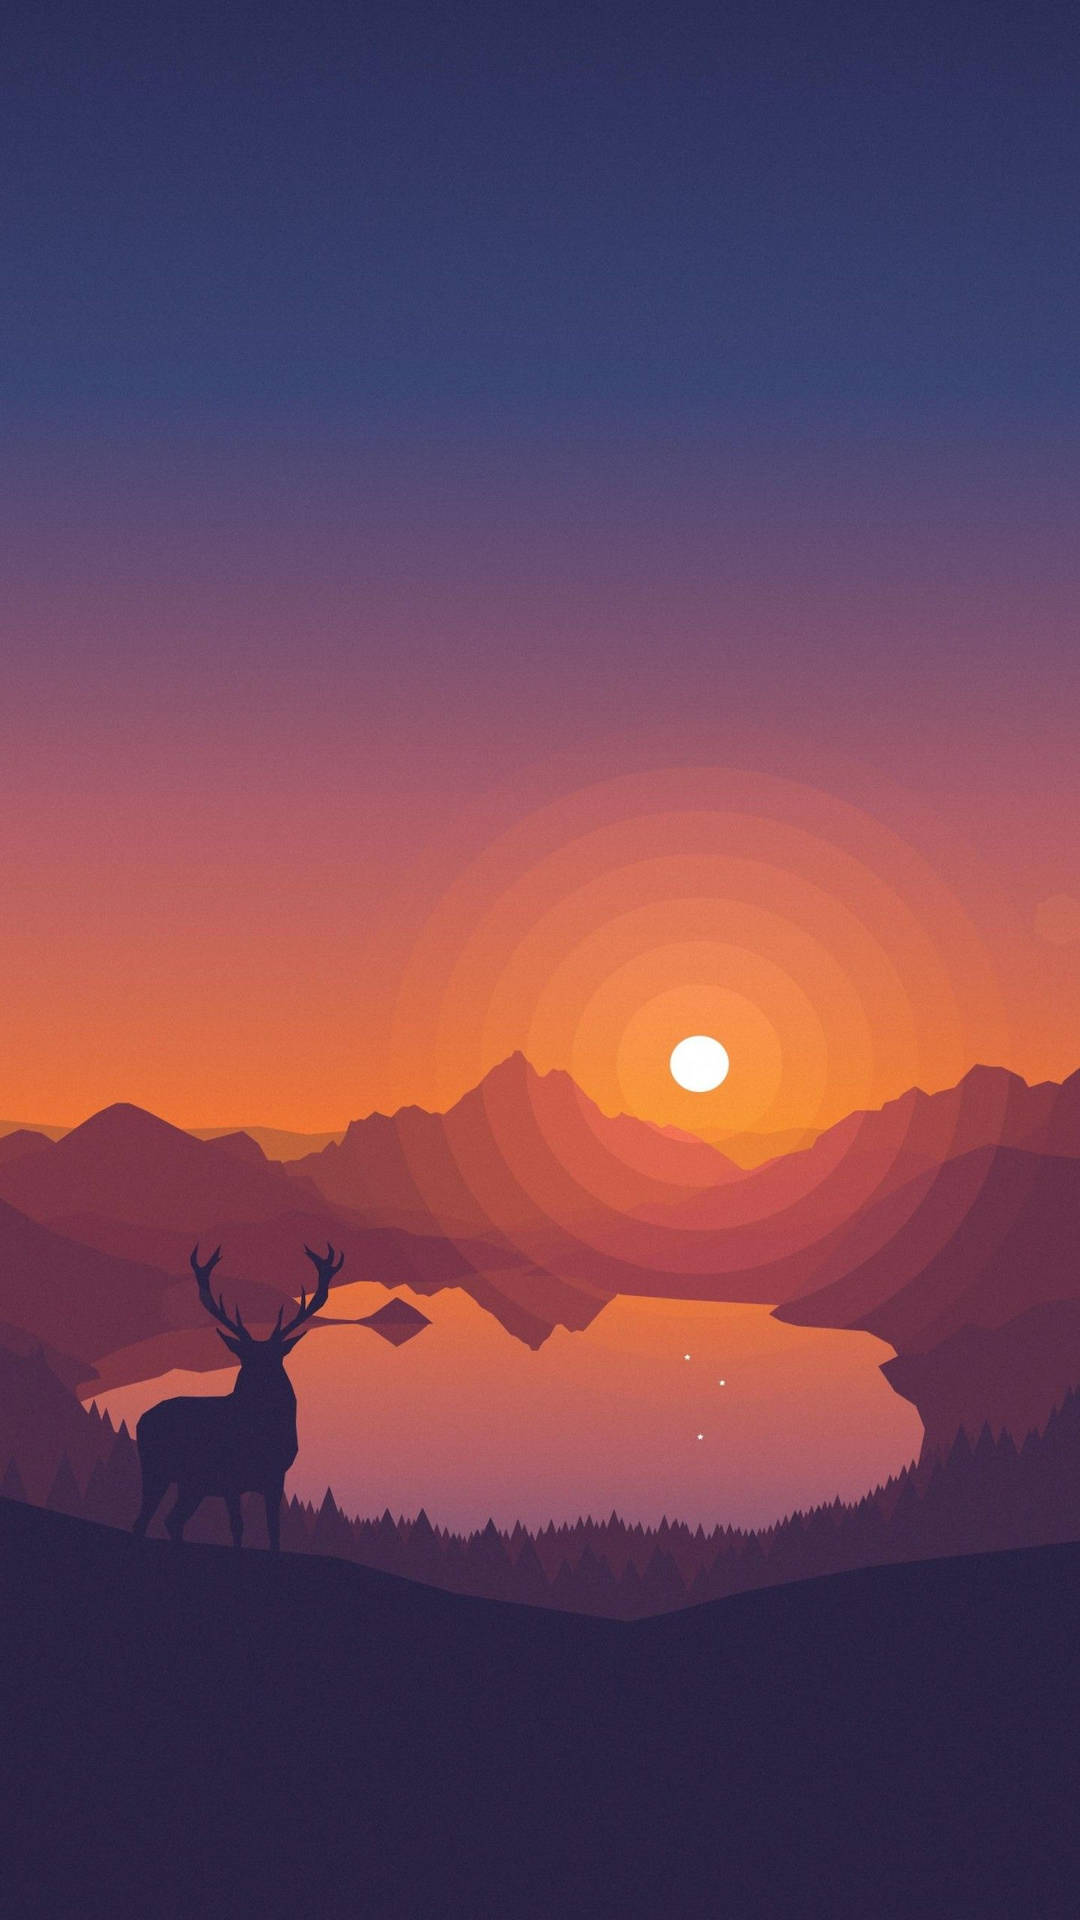 Firewatch Deer And Lake At Sunset